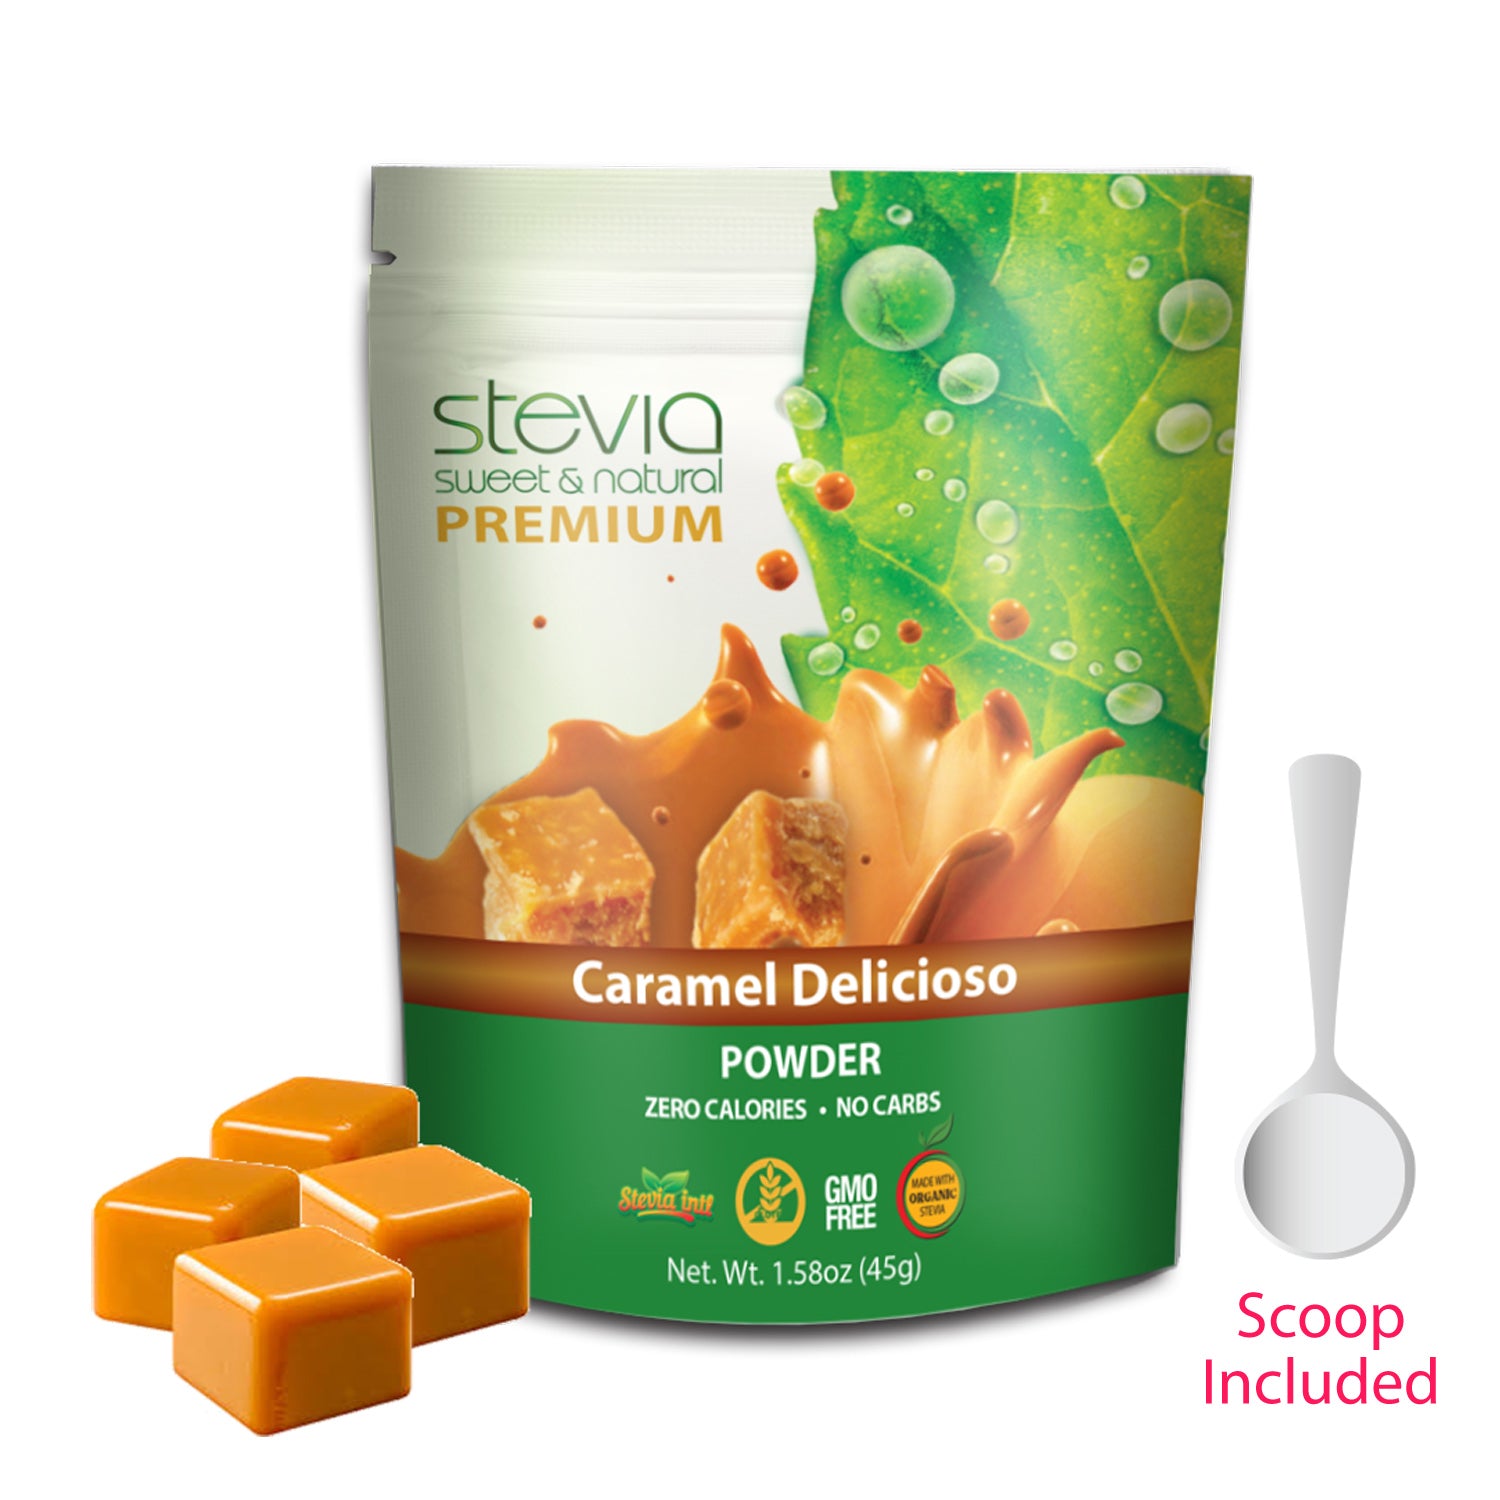 Stevia Caramel Delicioso Powder 1.58oz (45g) Zipper Pouch | Natural | Sugar Substitute | Beverages | Baking | NEW PRODUCT